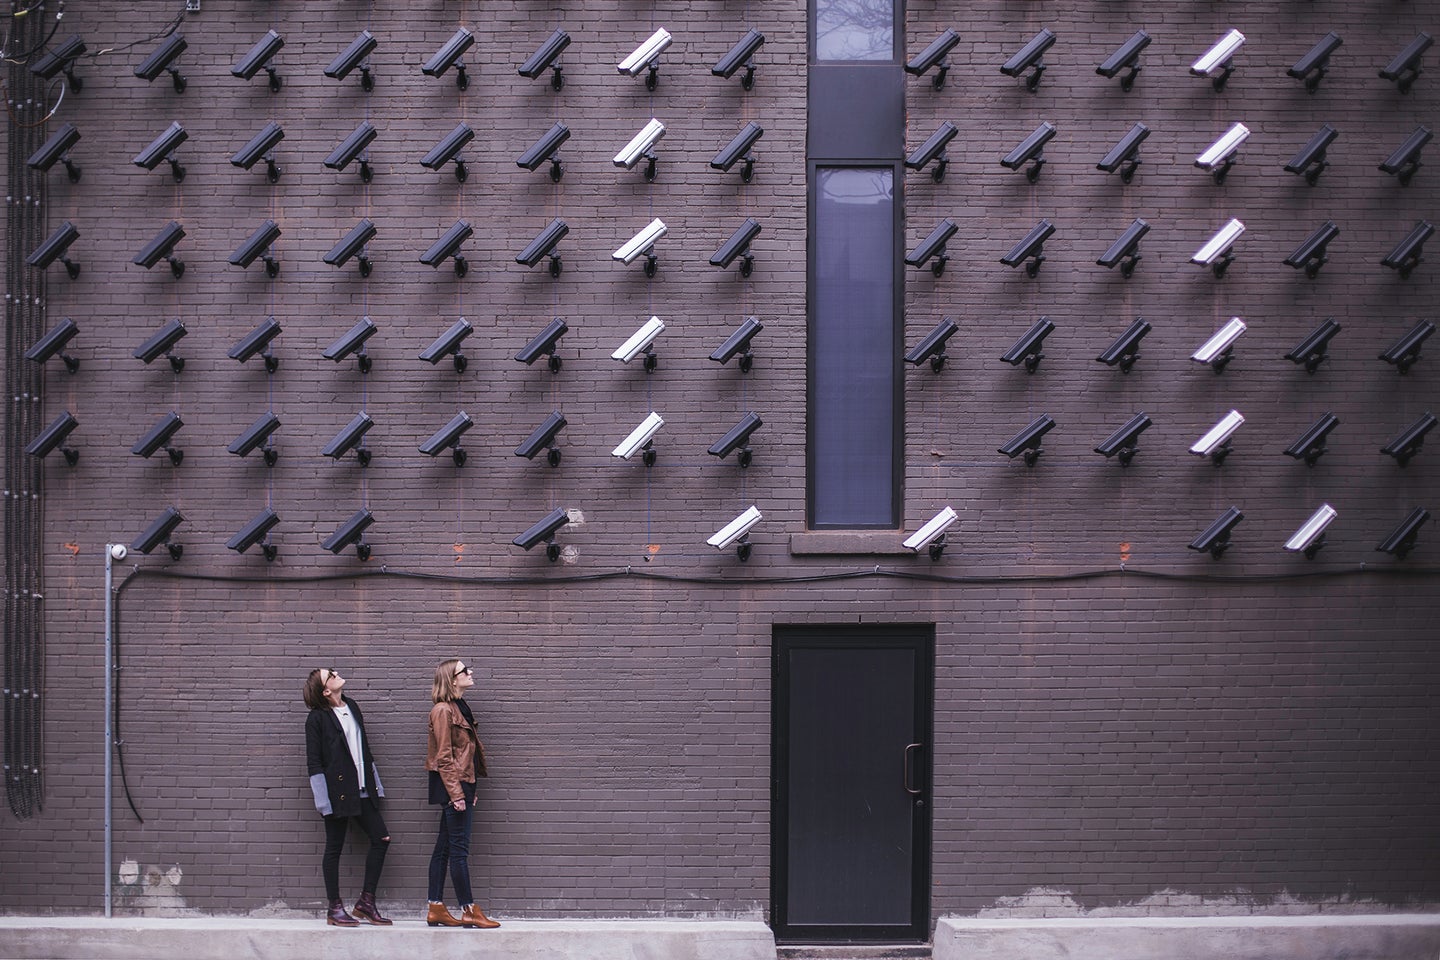 two people looking up at a lot of black and white security cameras mounted on a wall